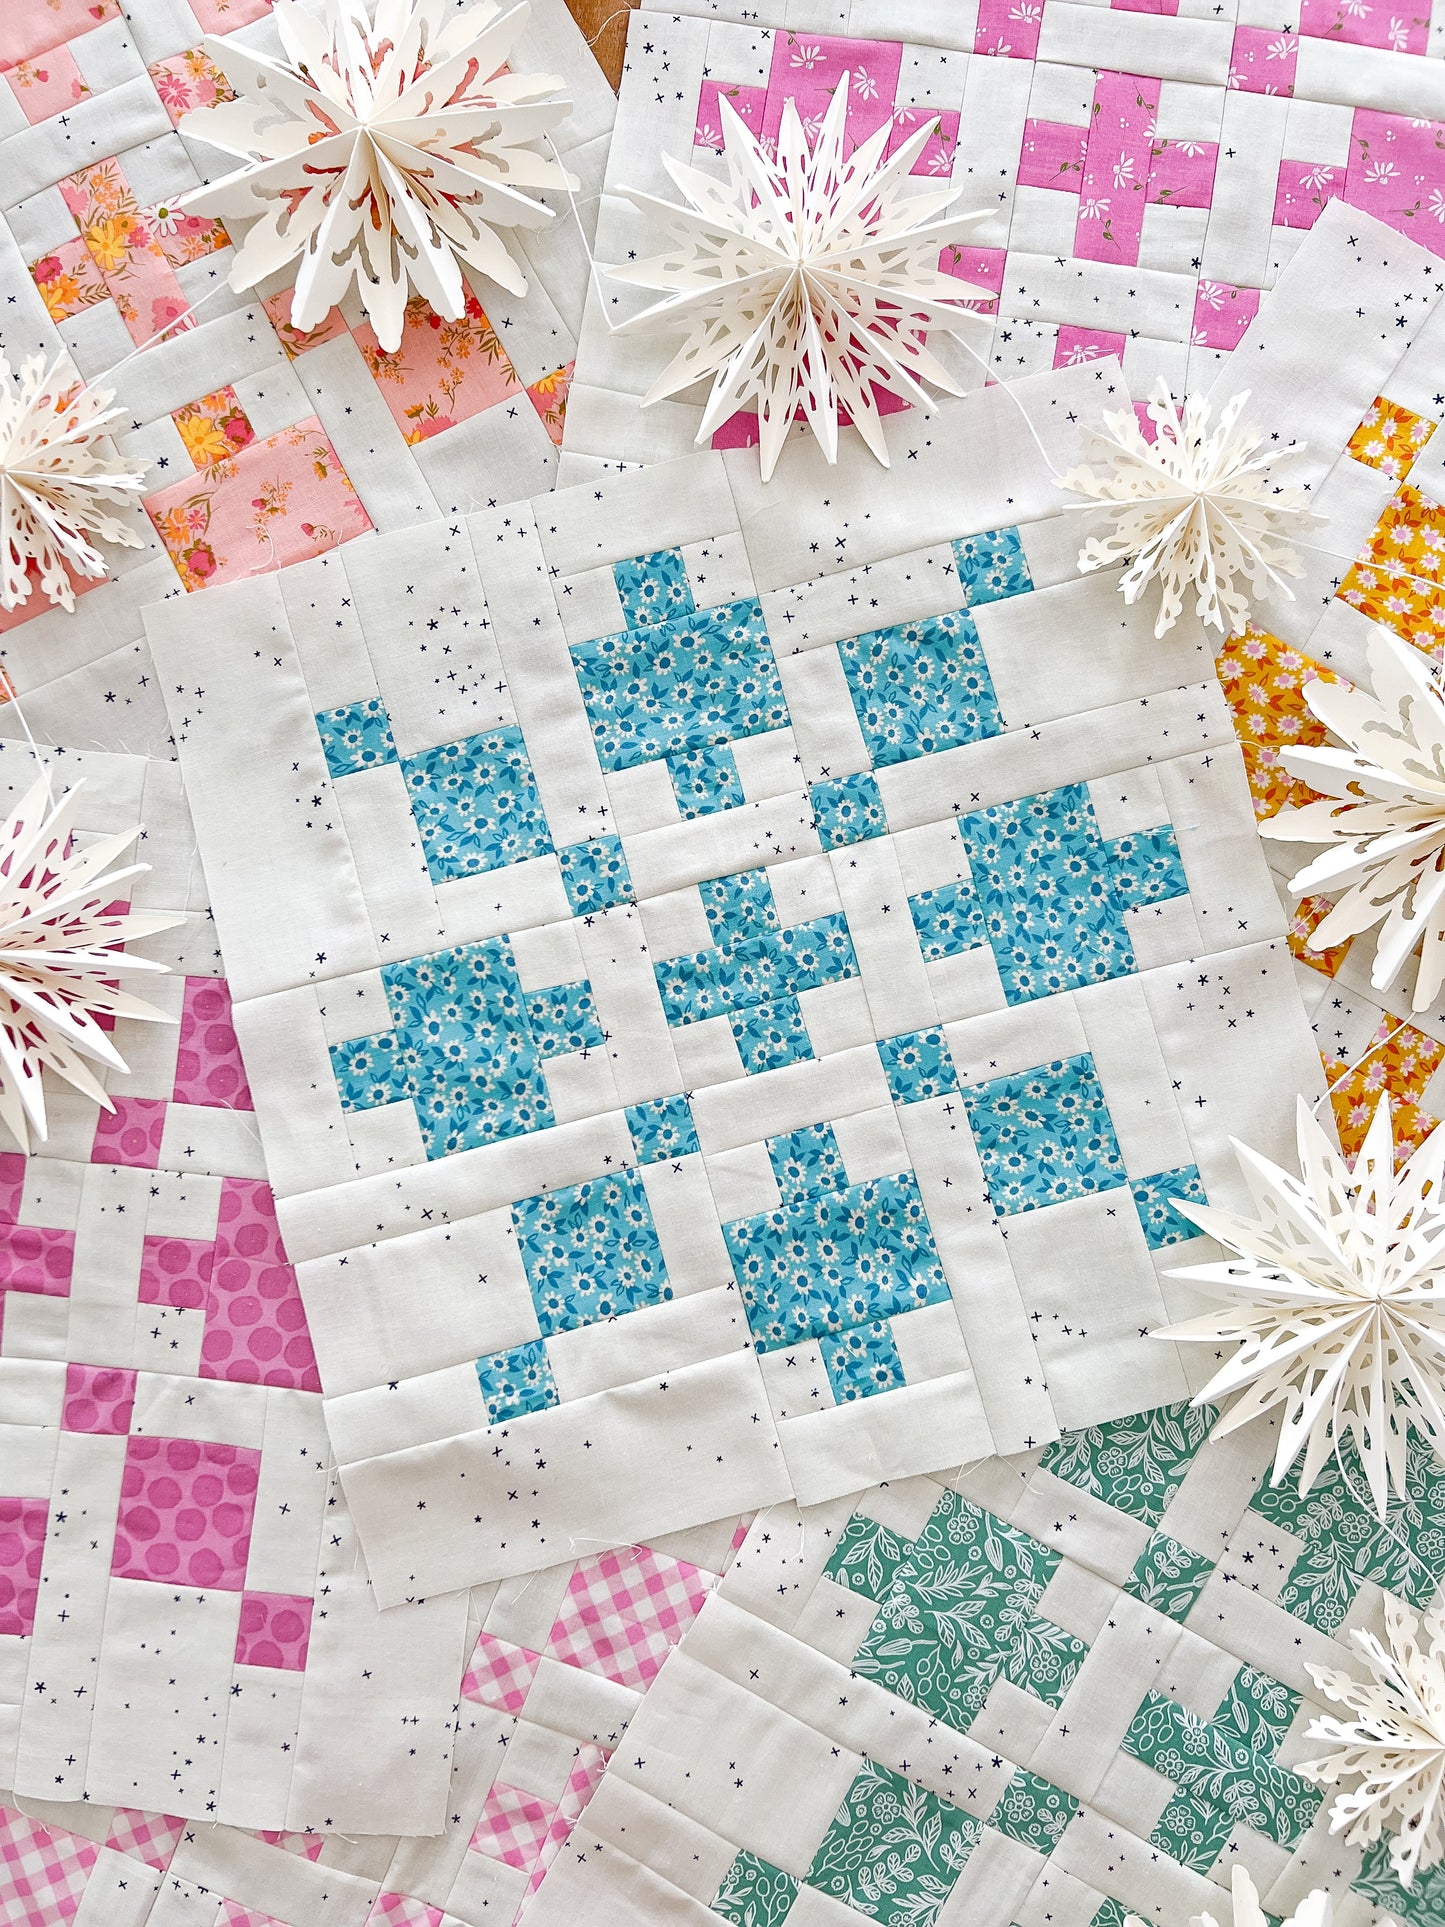 Wintry Quilt Pattern - Paper Pattern